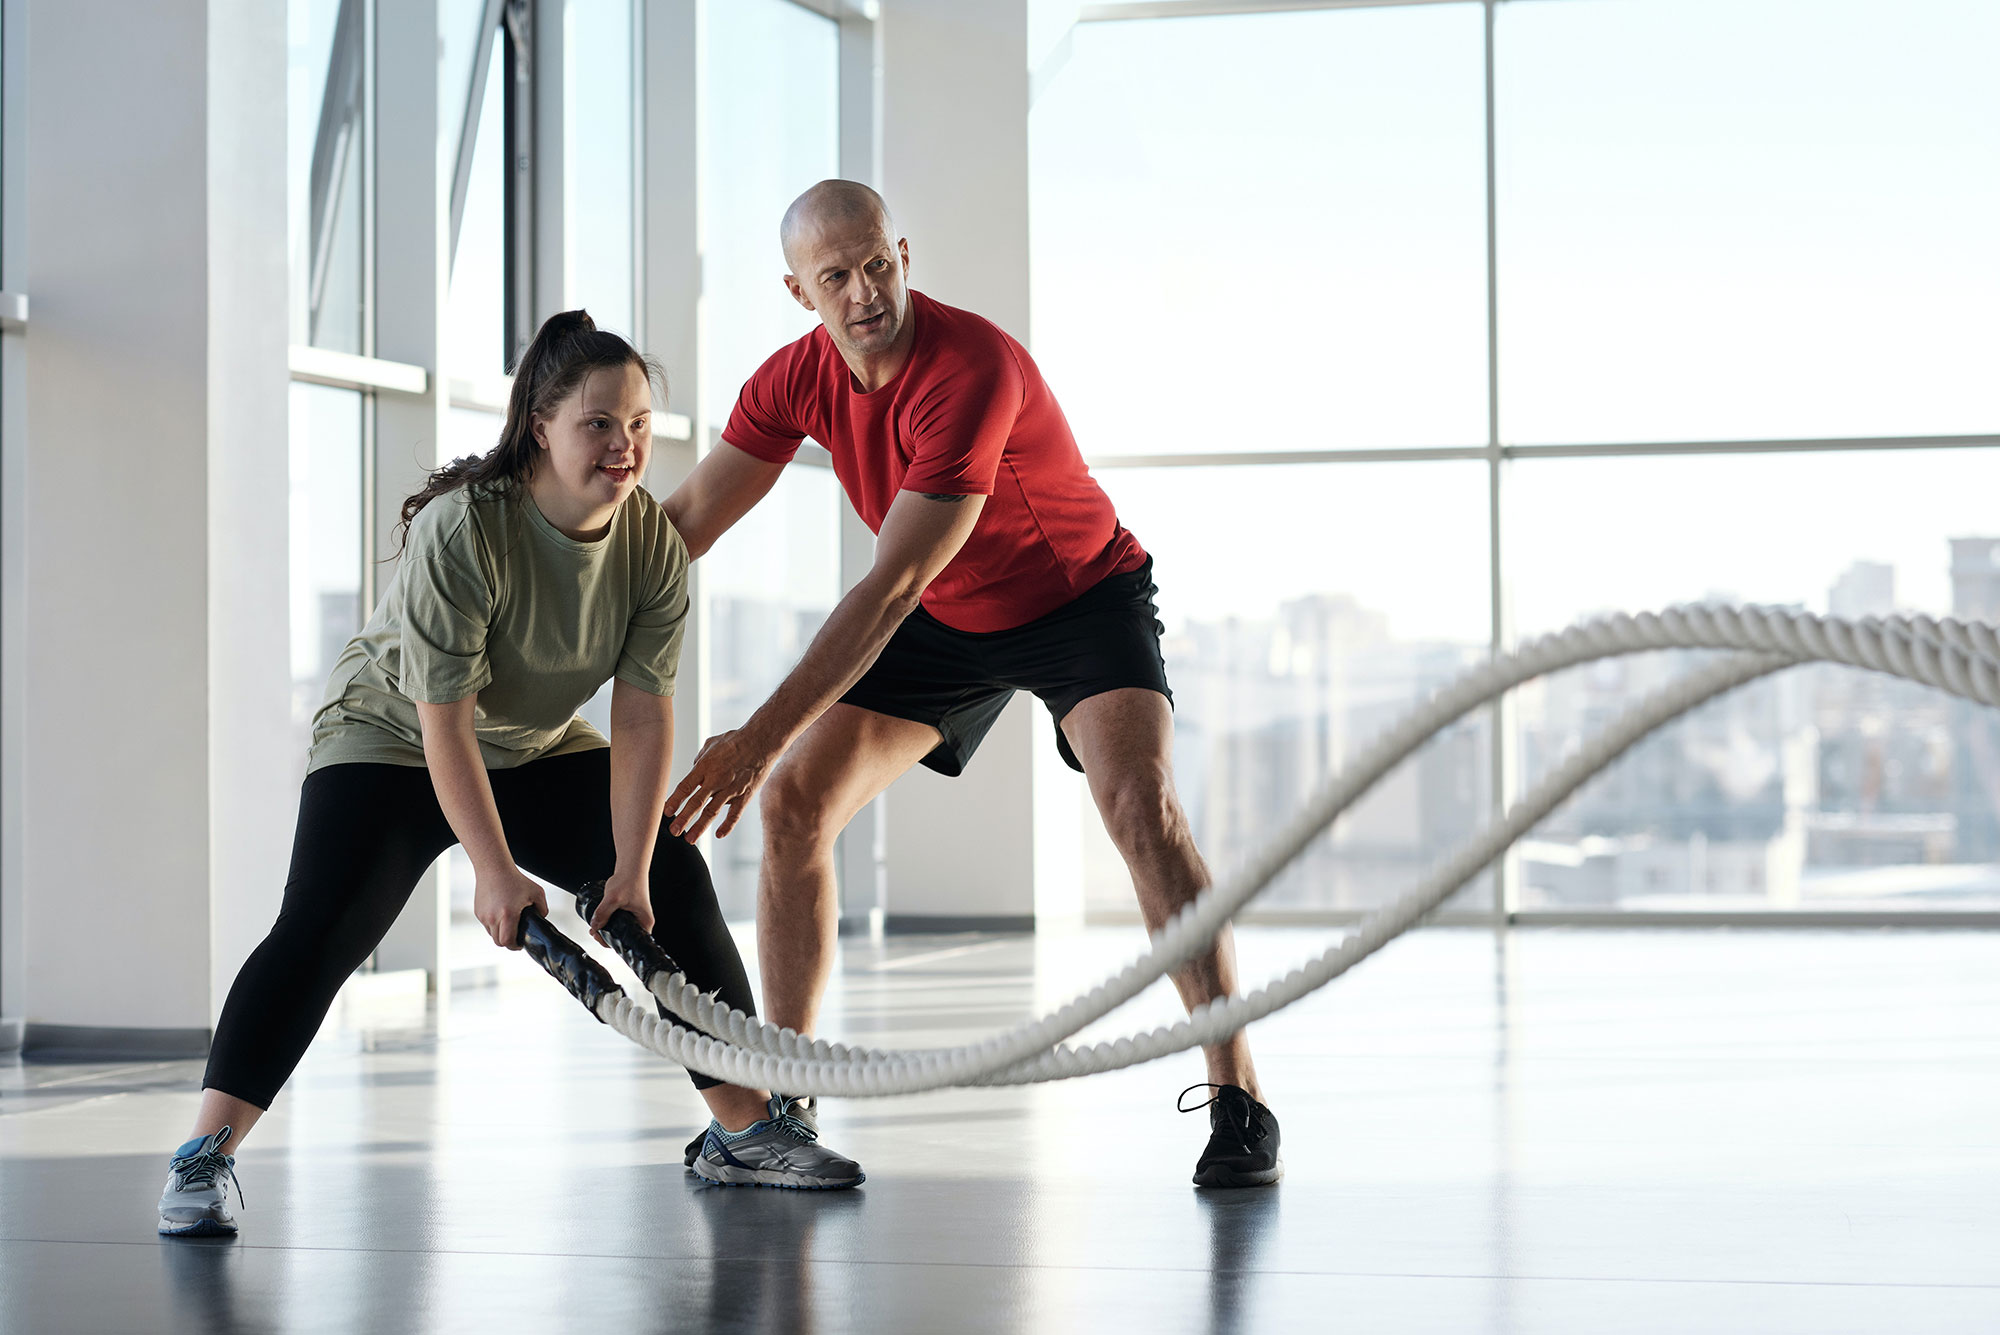 ukactive’s Everyone Can report reveals what disabled people want from the fitness and leisure sector